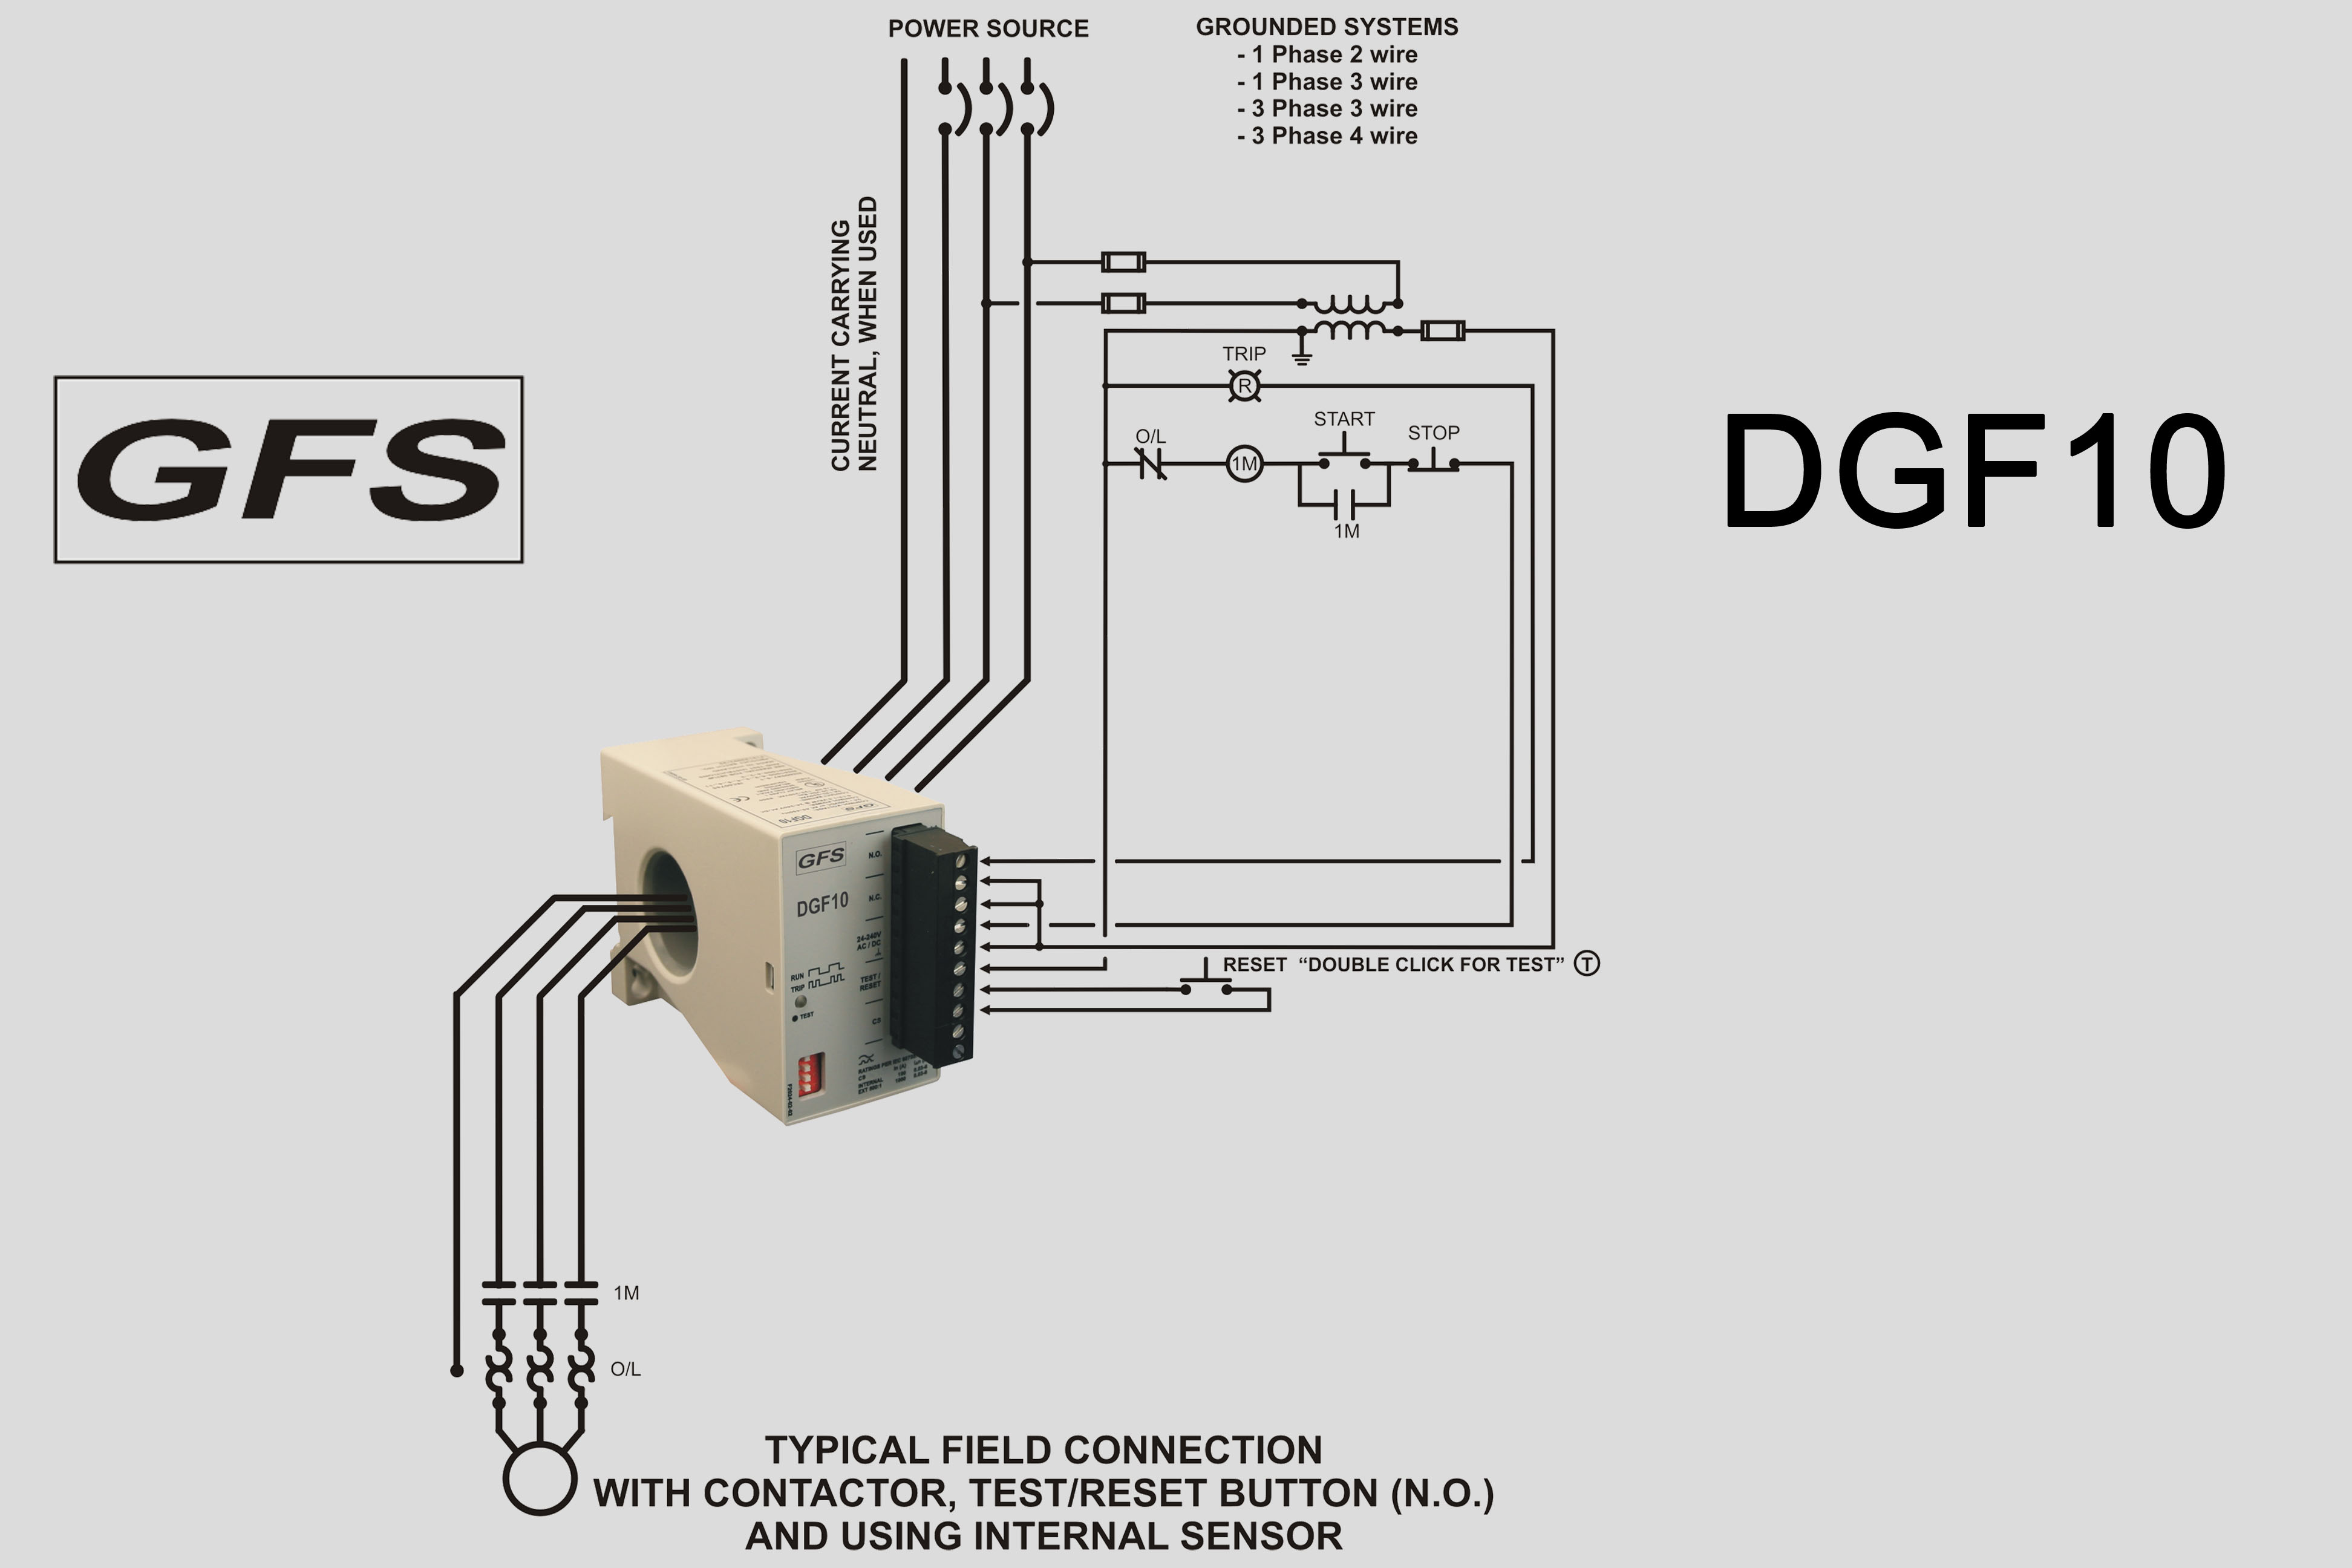 Ground Fault Relay DGF10 typical field connection using internal sensor